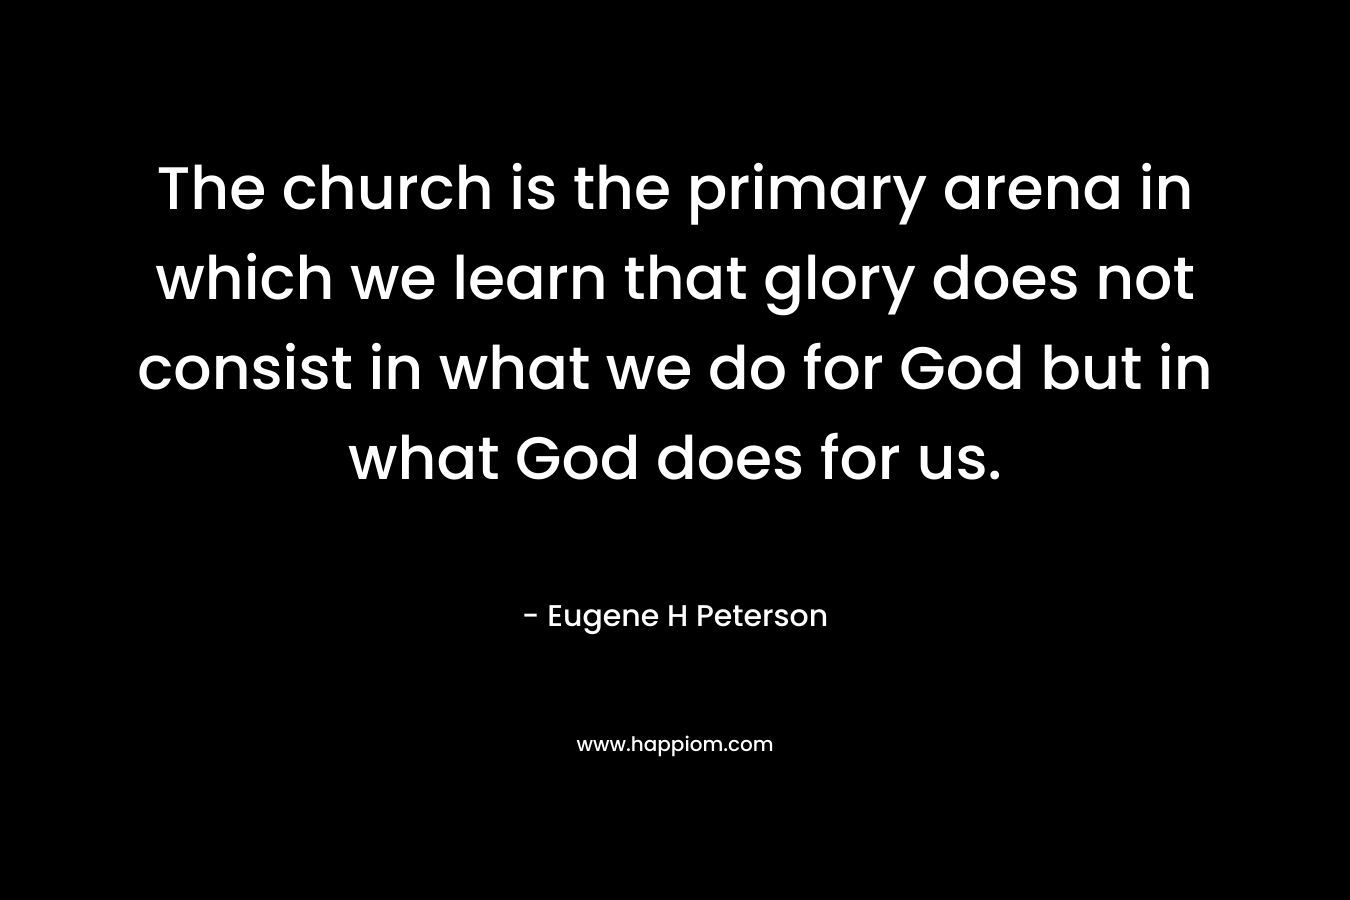 The church is the primary arena in which we learn that glory does not consist in what we do for God but in what God does for us.